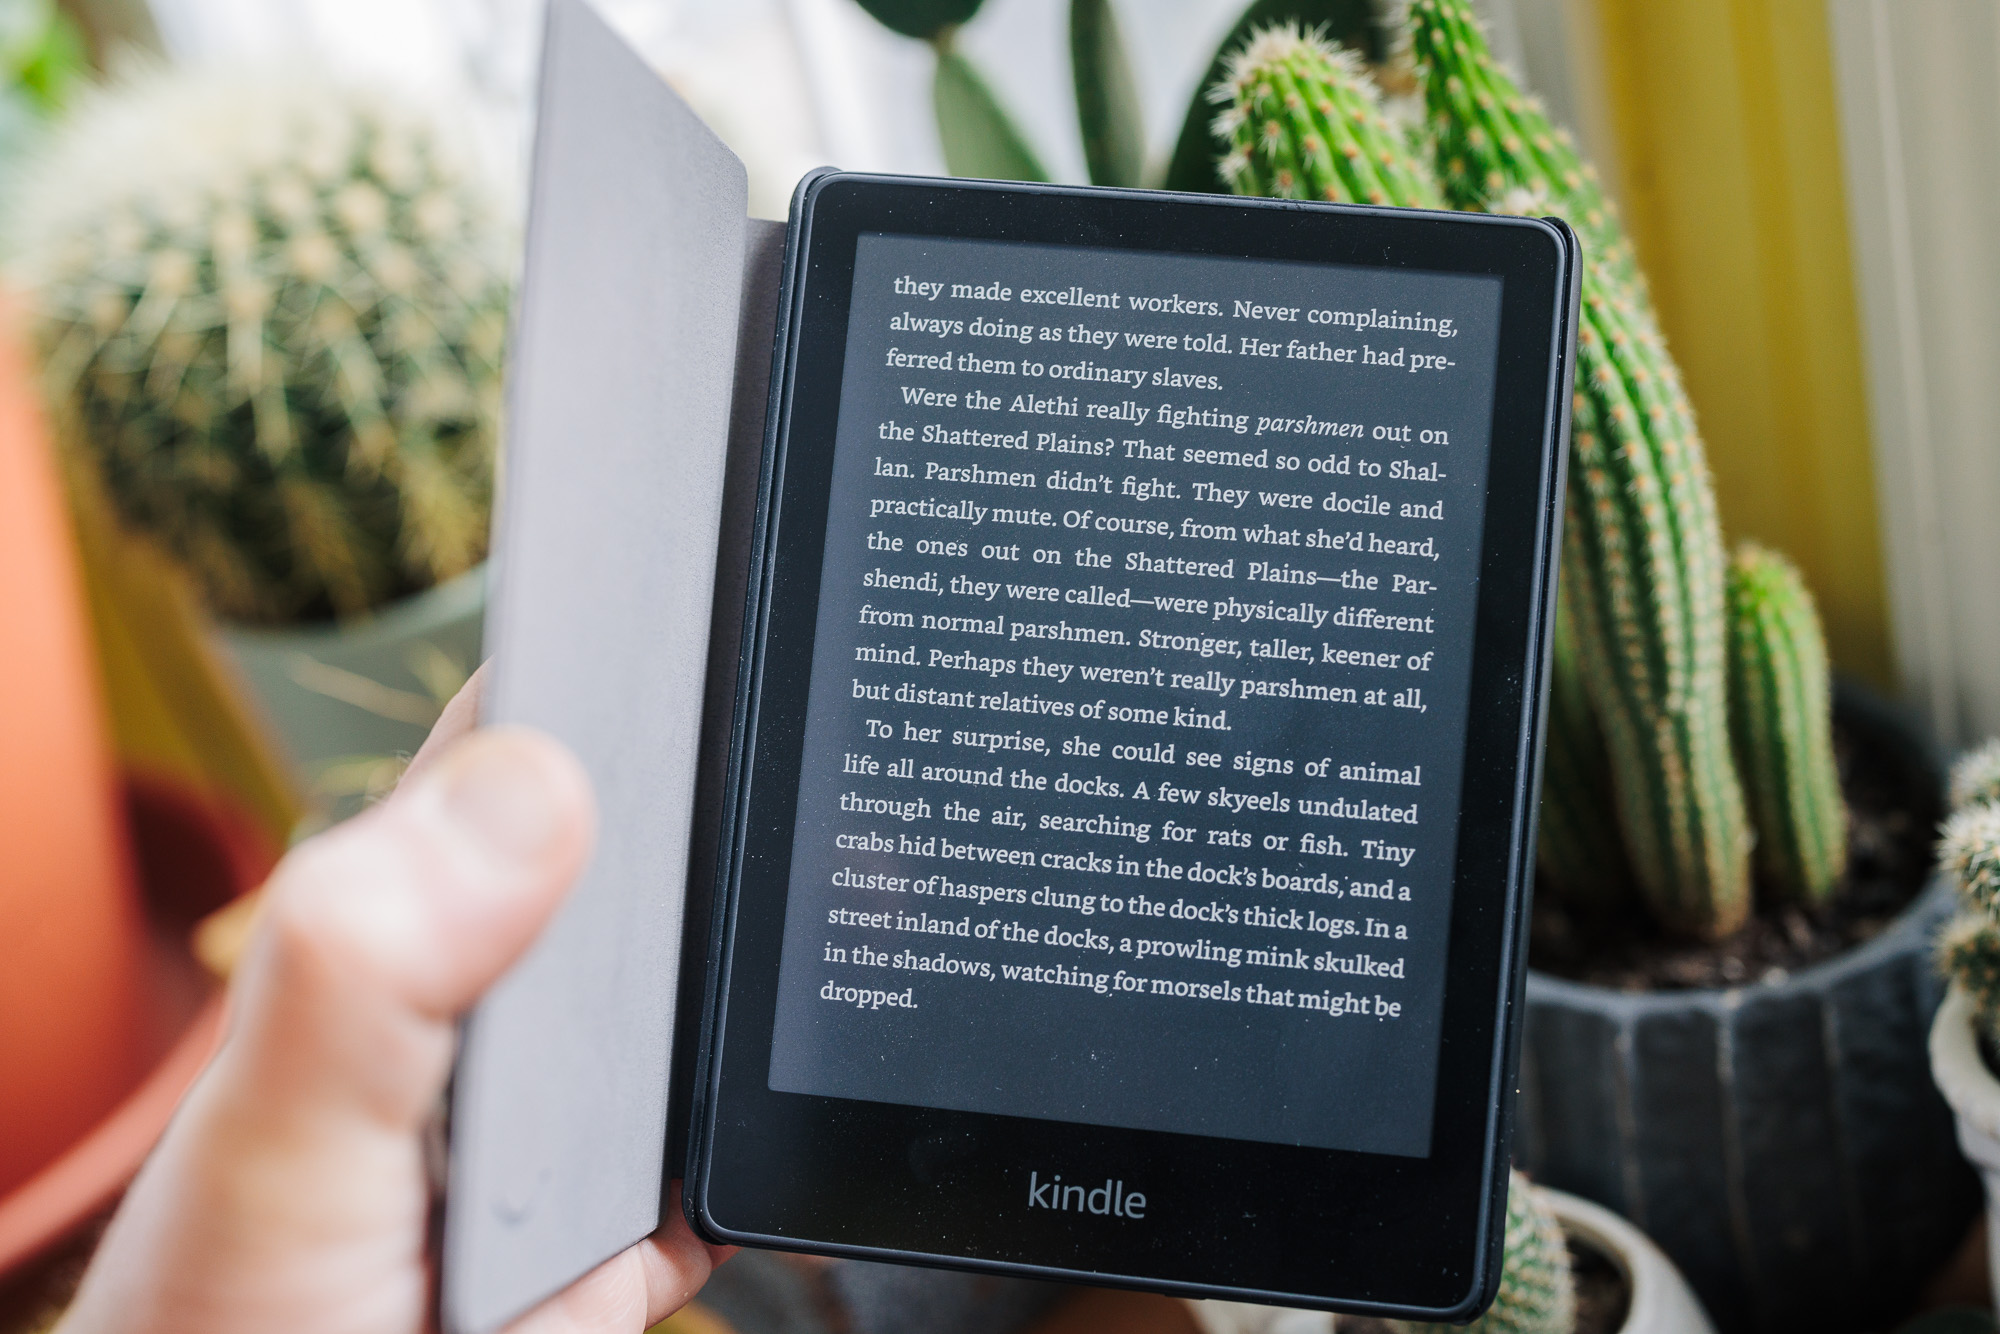 Review: Should you buy the Kindle Paperwhite?